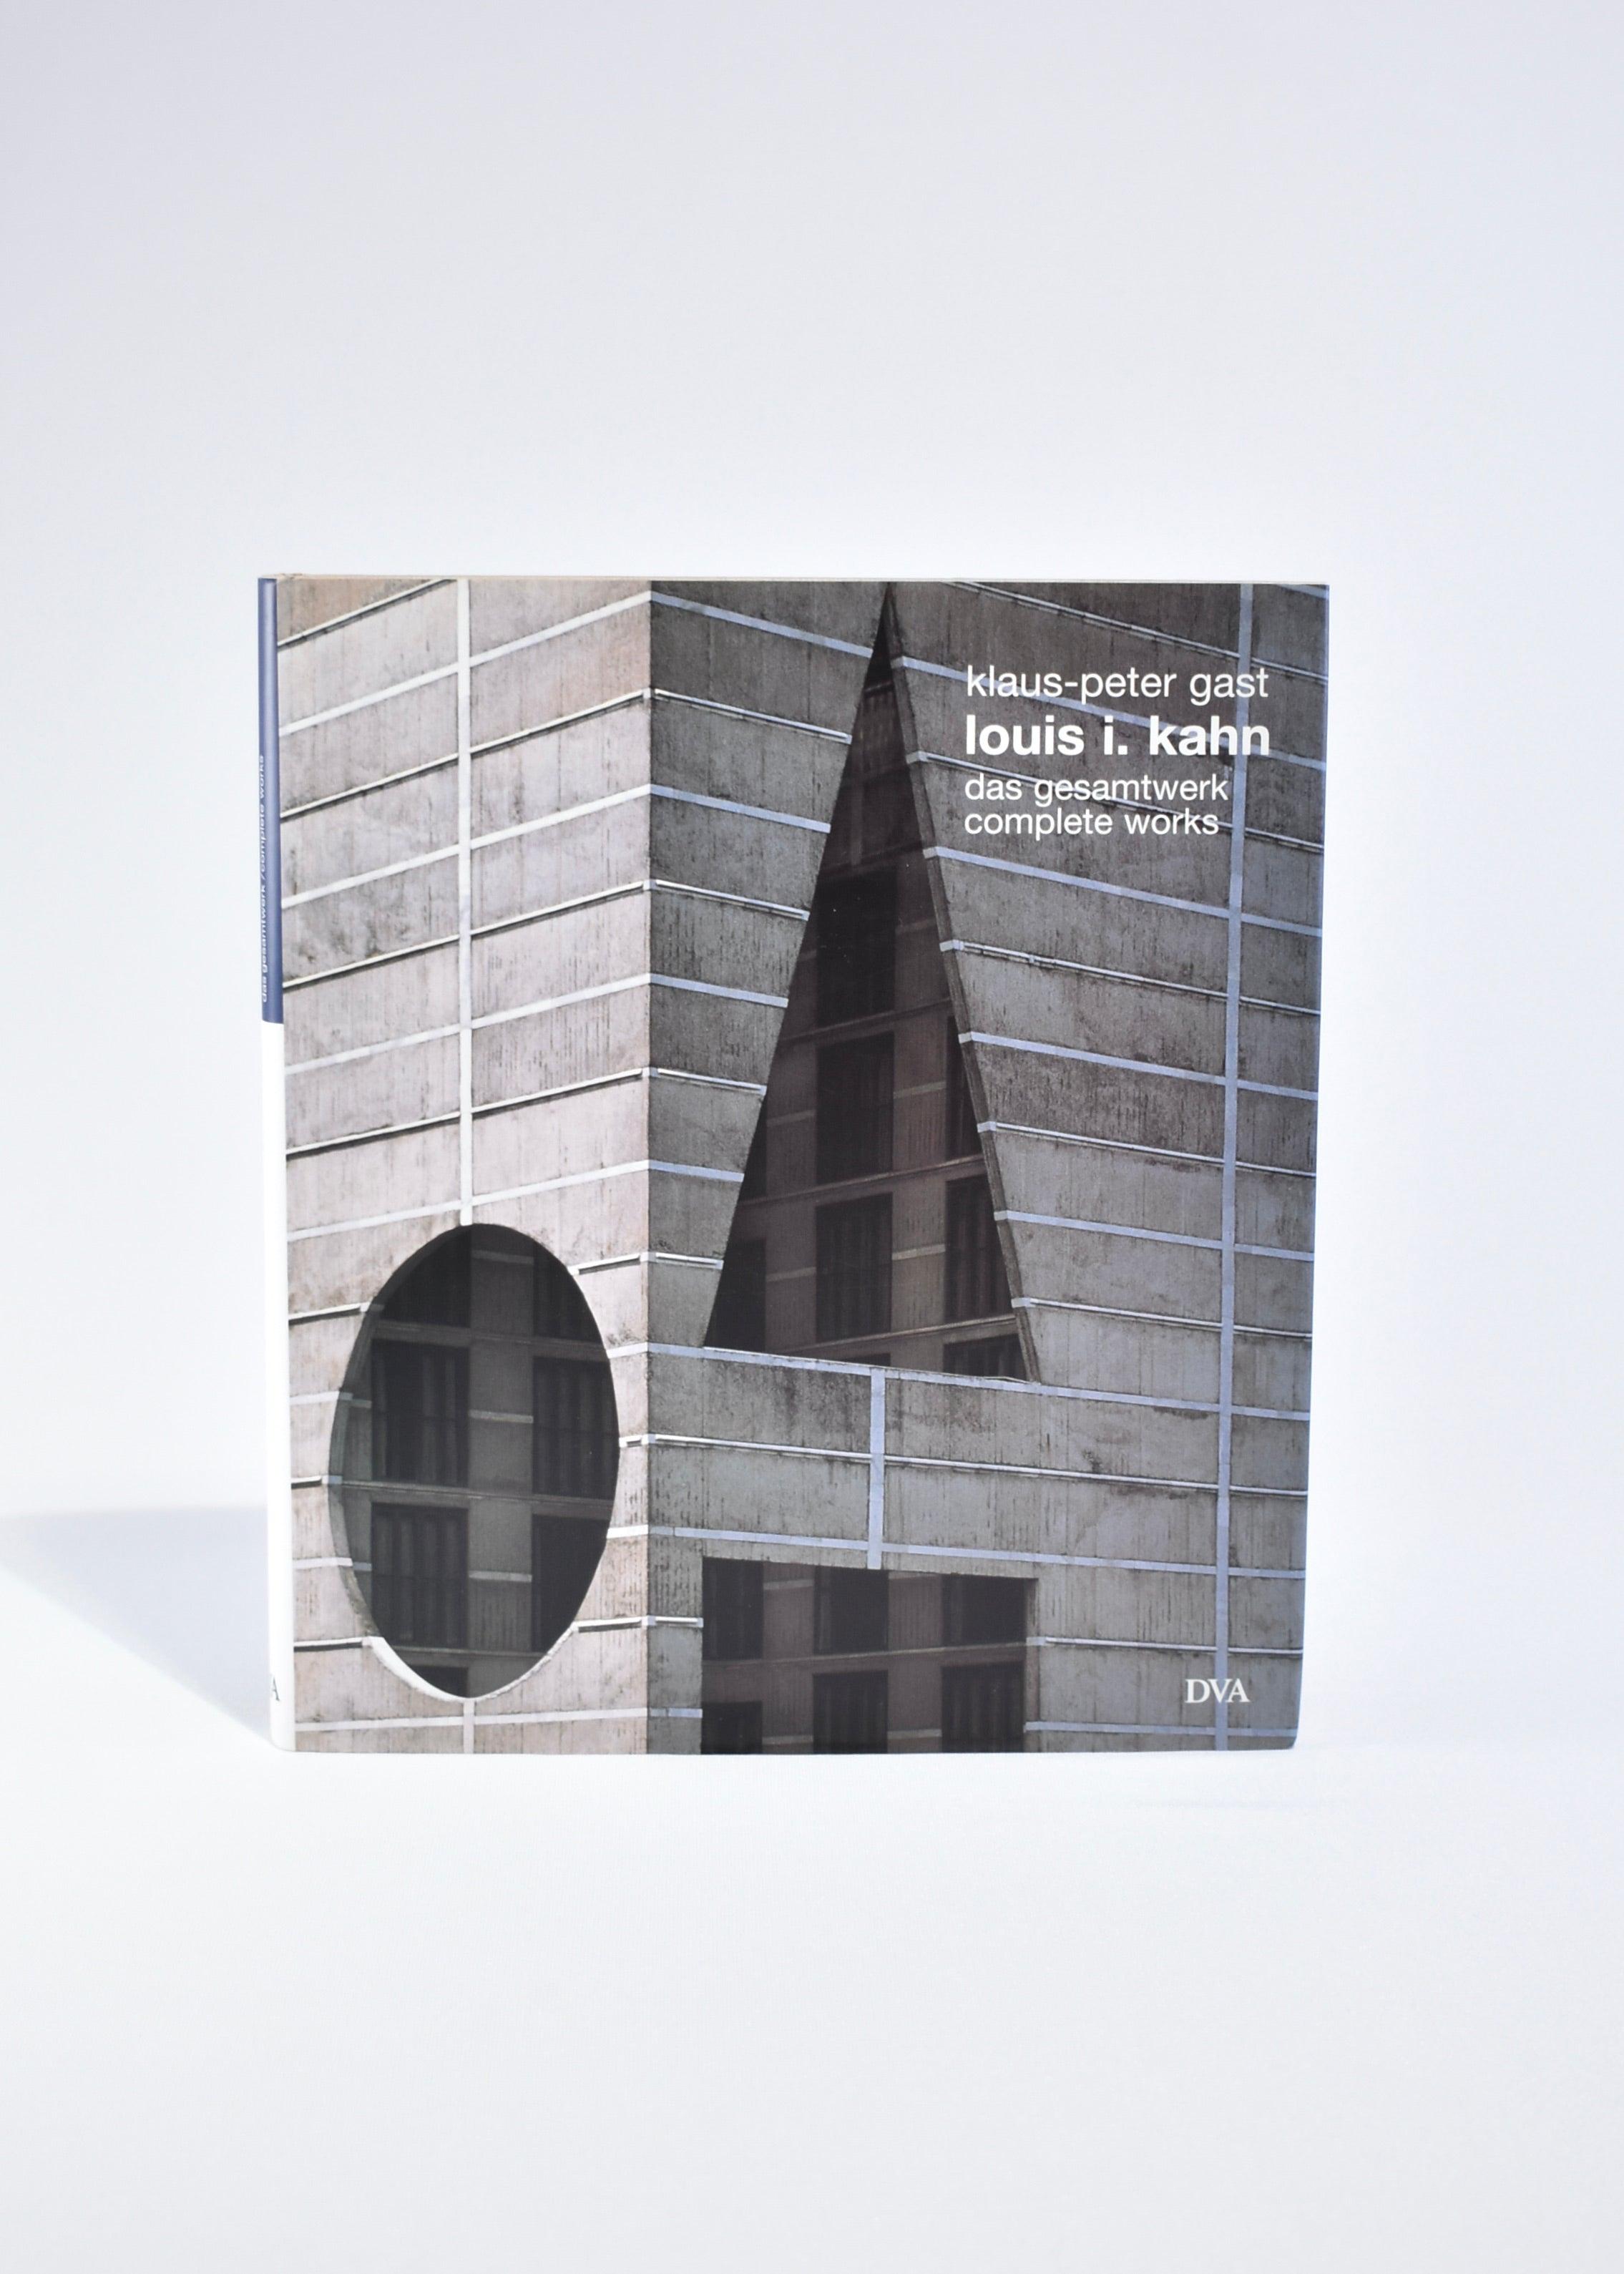 Vintage hardback coffee table book featuring the oeuvre of Louis I. Kahn. By Klaus-Peter Gast, published in 2001. Text in both English and German. First edition, 207 pages.

